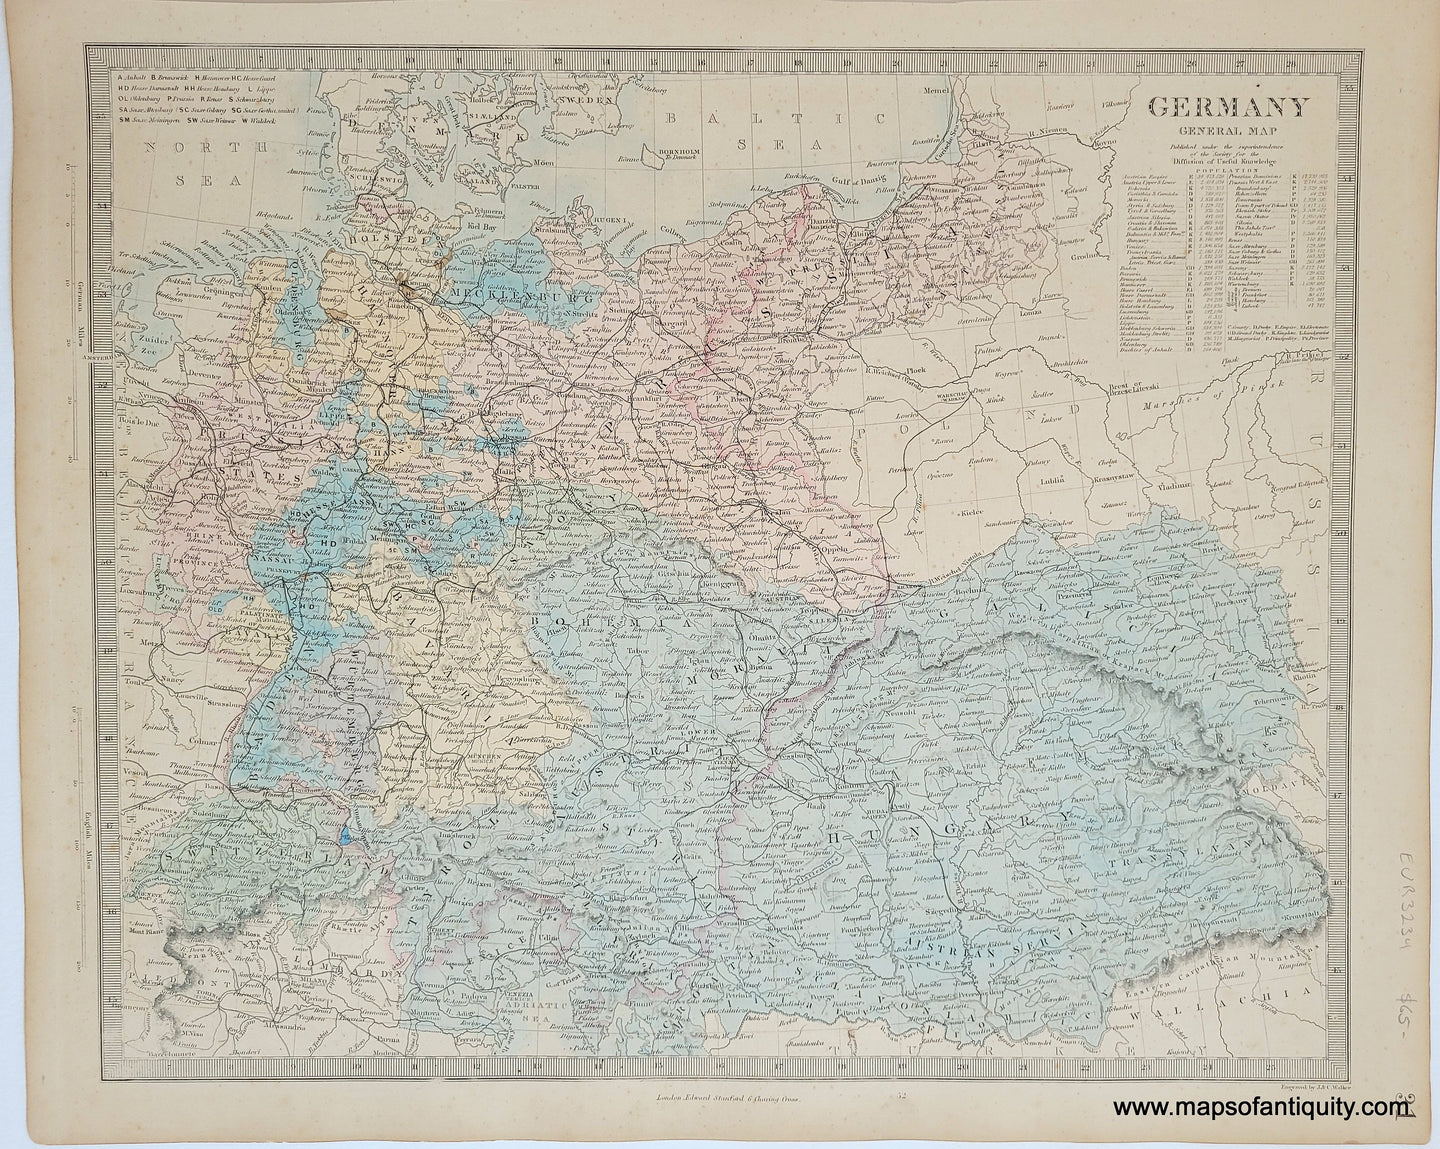 Genuine-Antique-Map-Germany-General-Map-Germany--1860-SDUK-Society-for-the-Diffusion-of-Useful-Knowledge-Maps-Of-Antiquity-1800s-19th-century